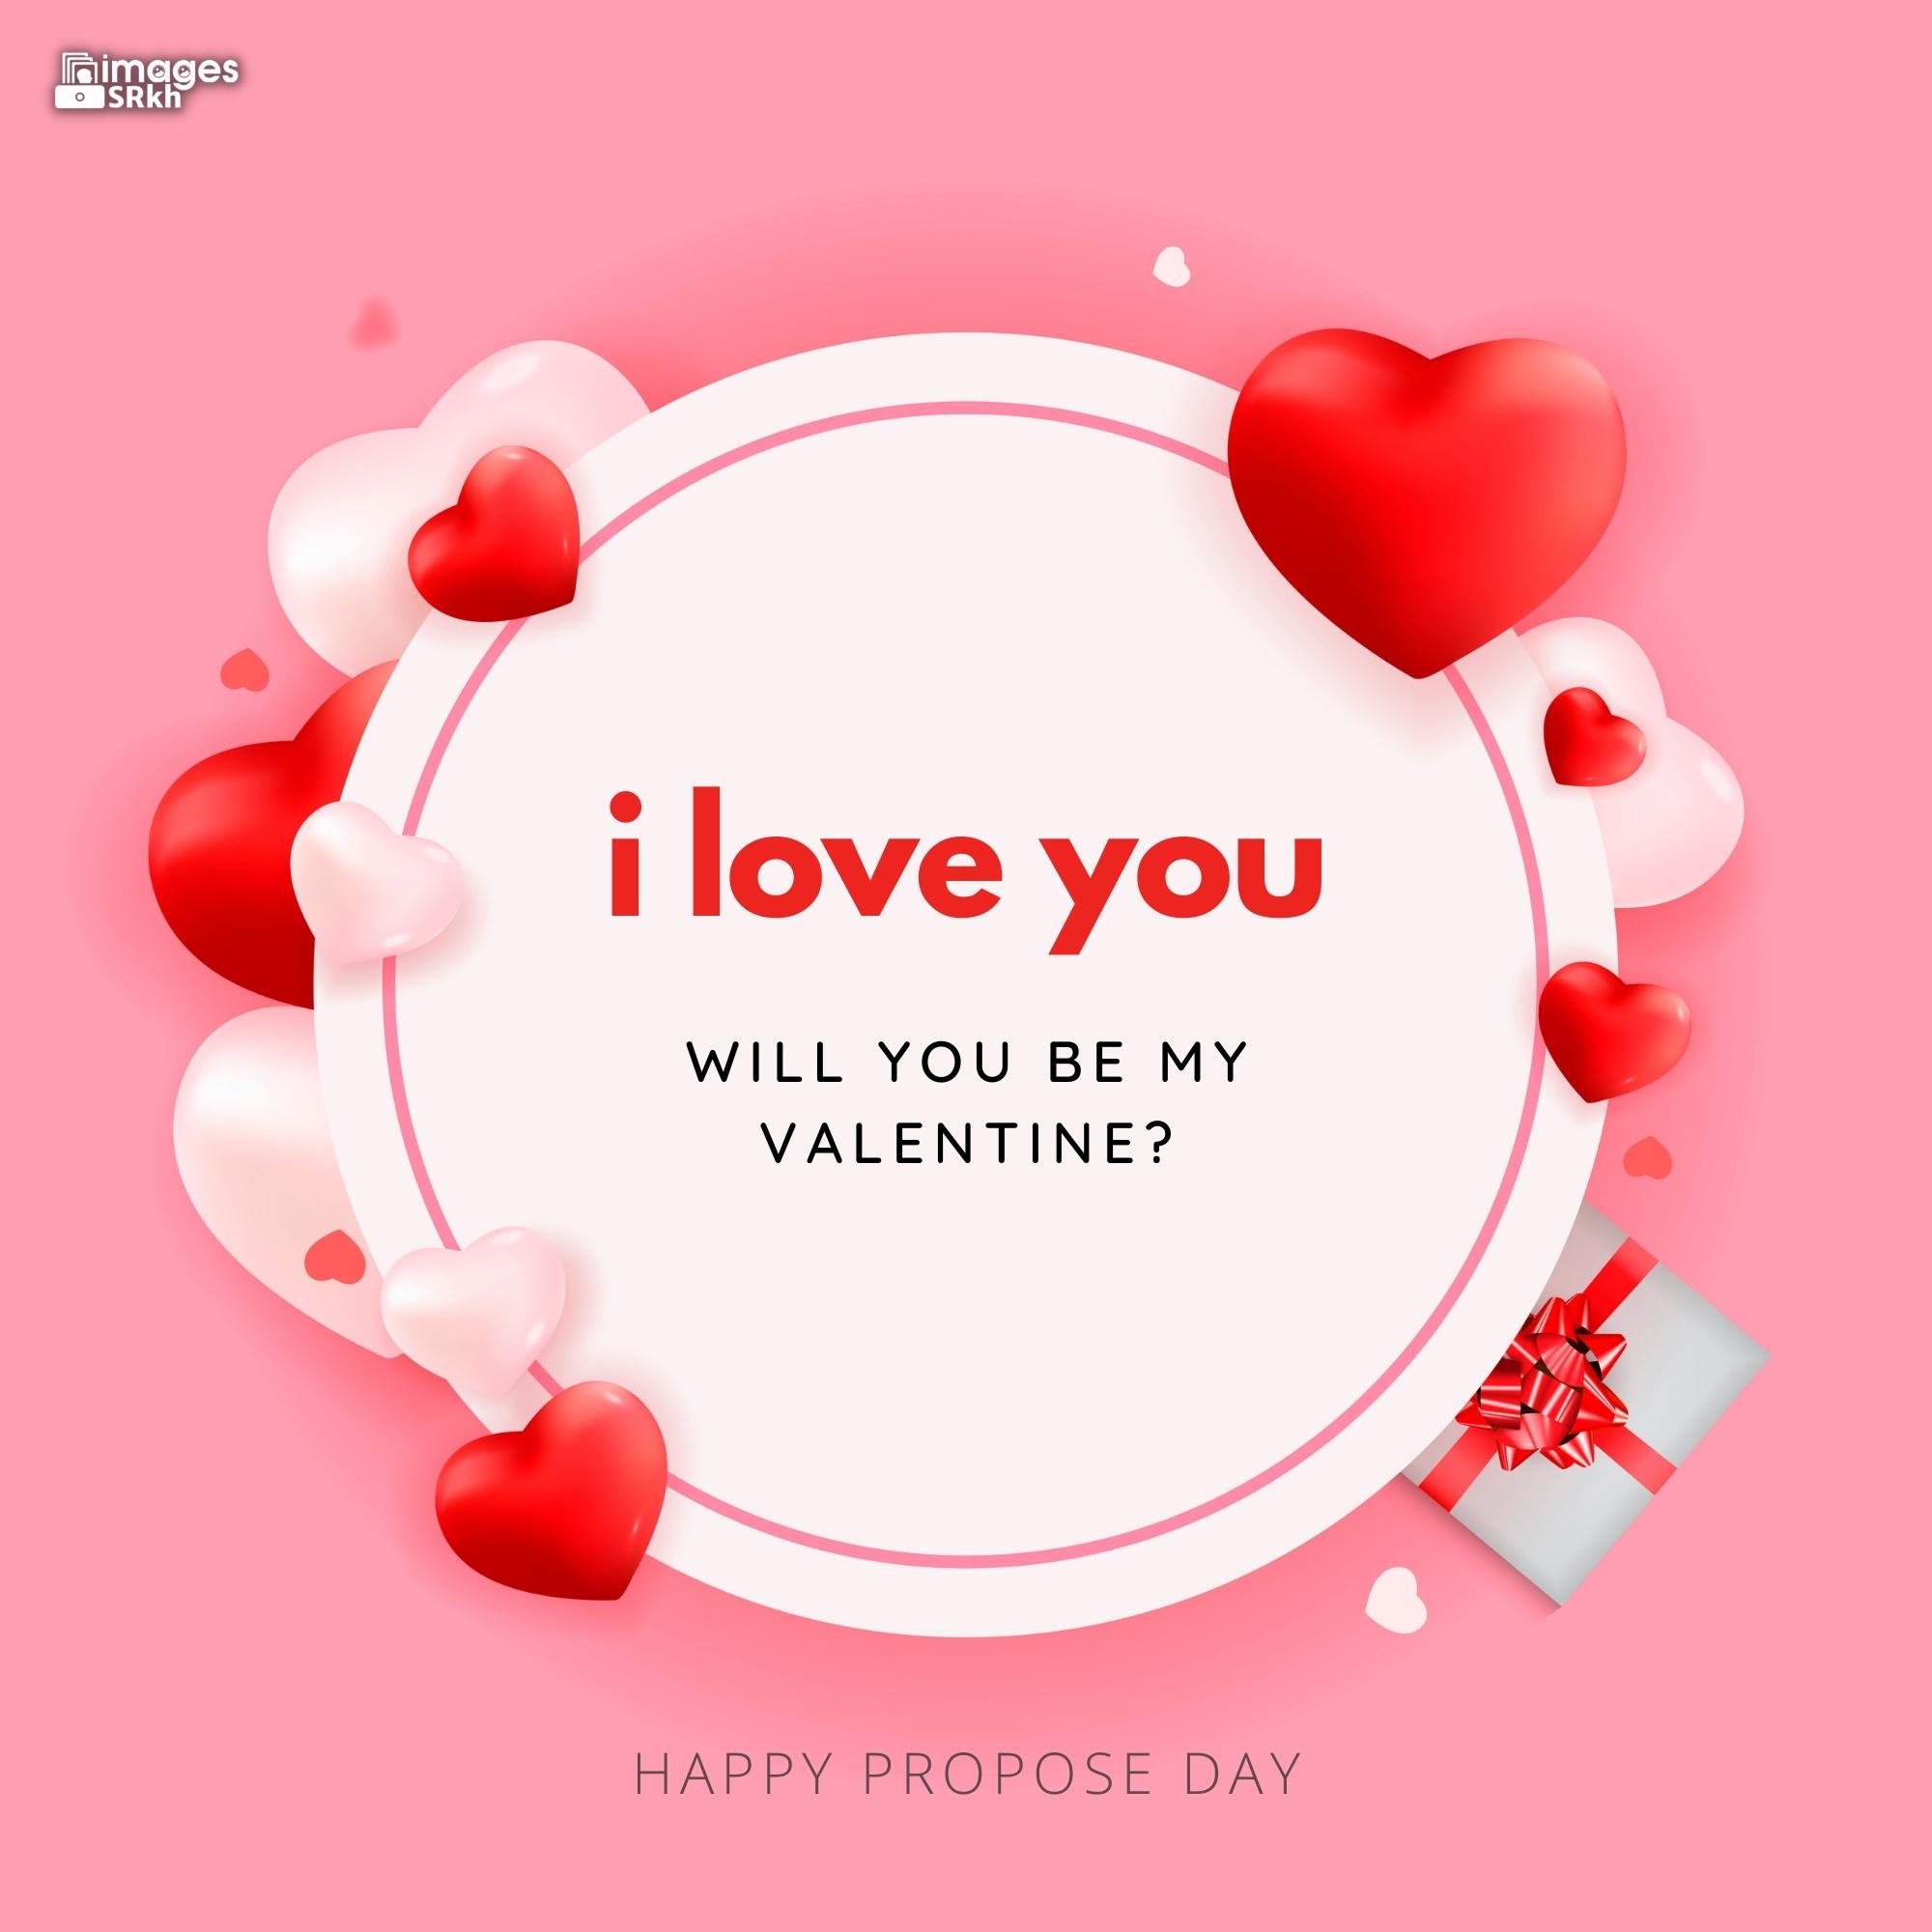 Happy Propose Day Images | 441 | I love you will you be my valentine